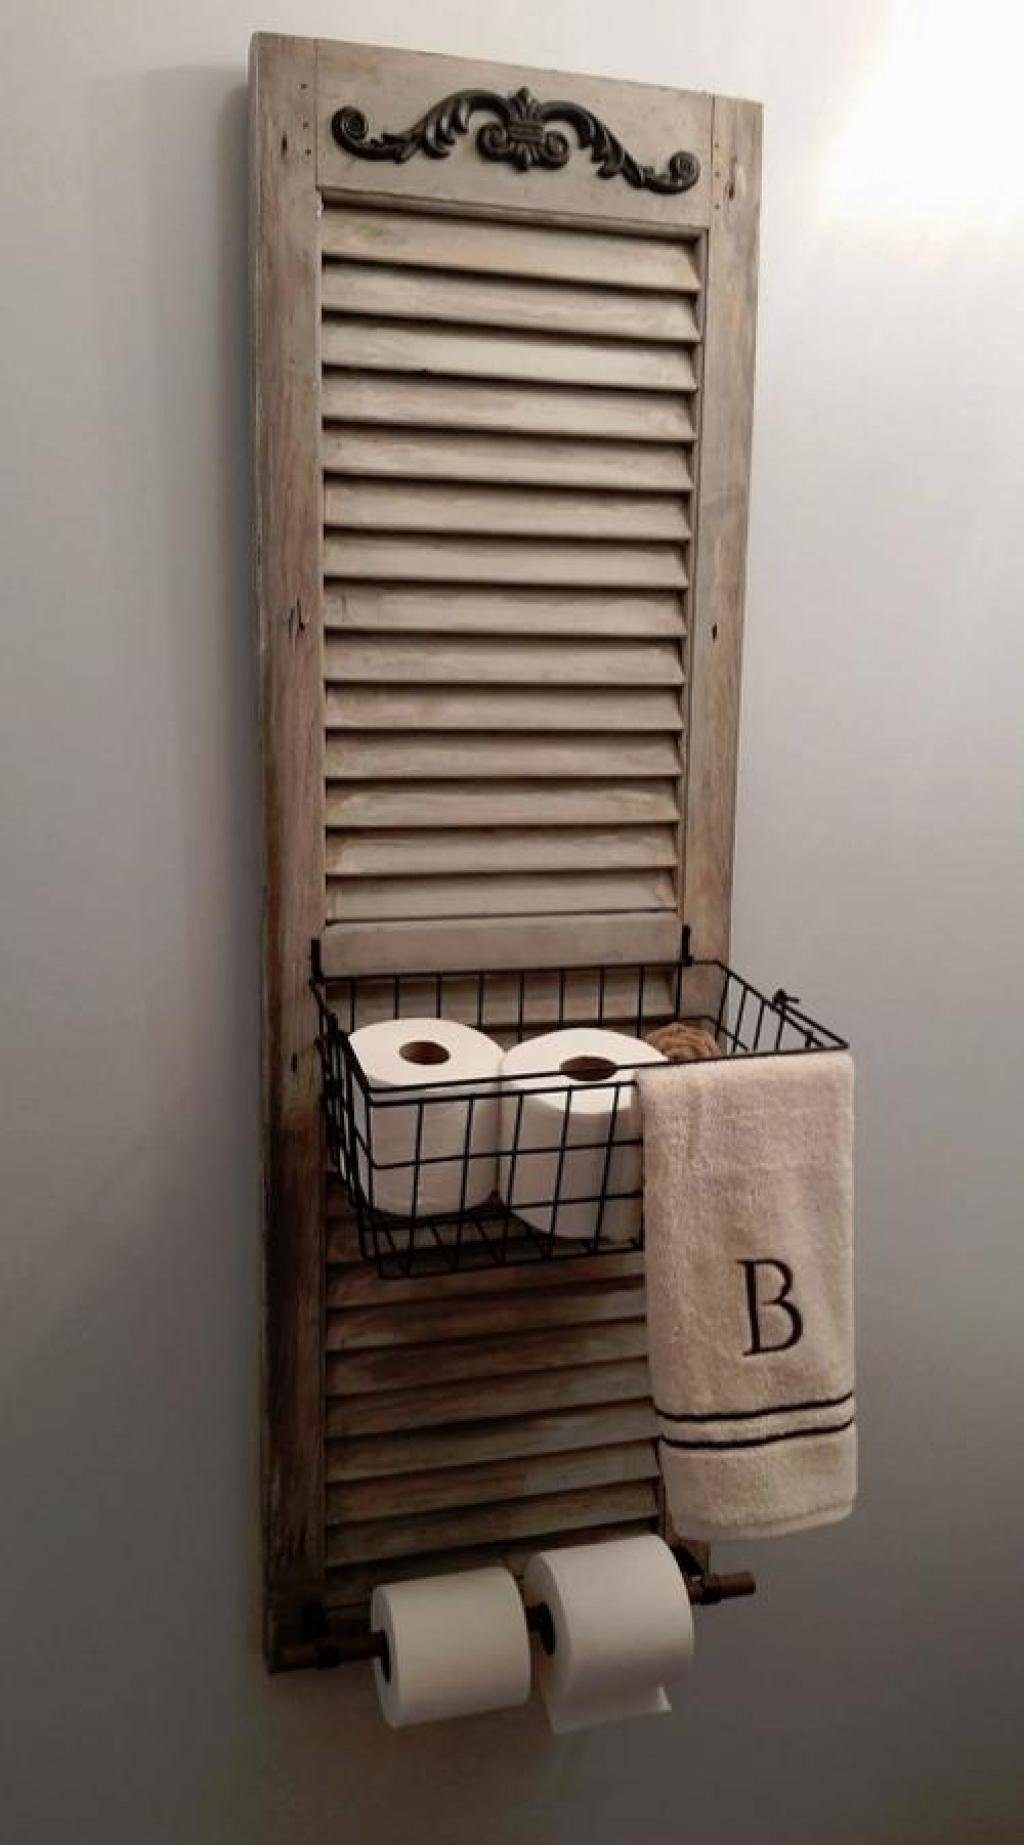 Storage basket with whitewashed shutters and toilet paper dispenser - decoration ideas